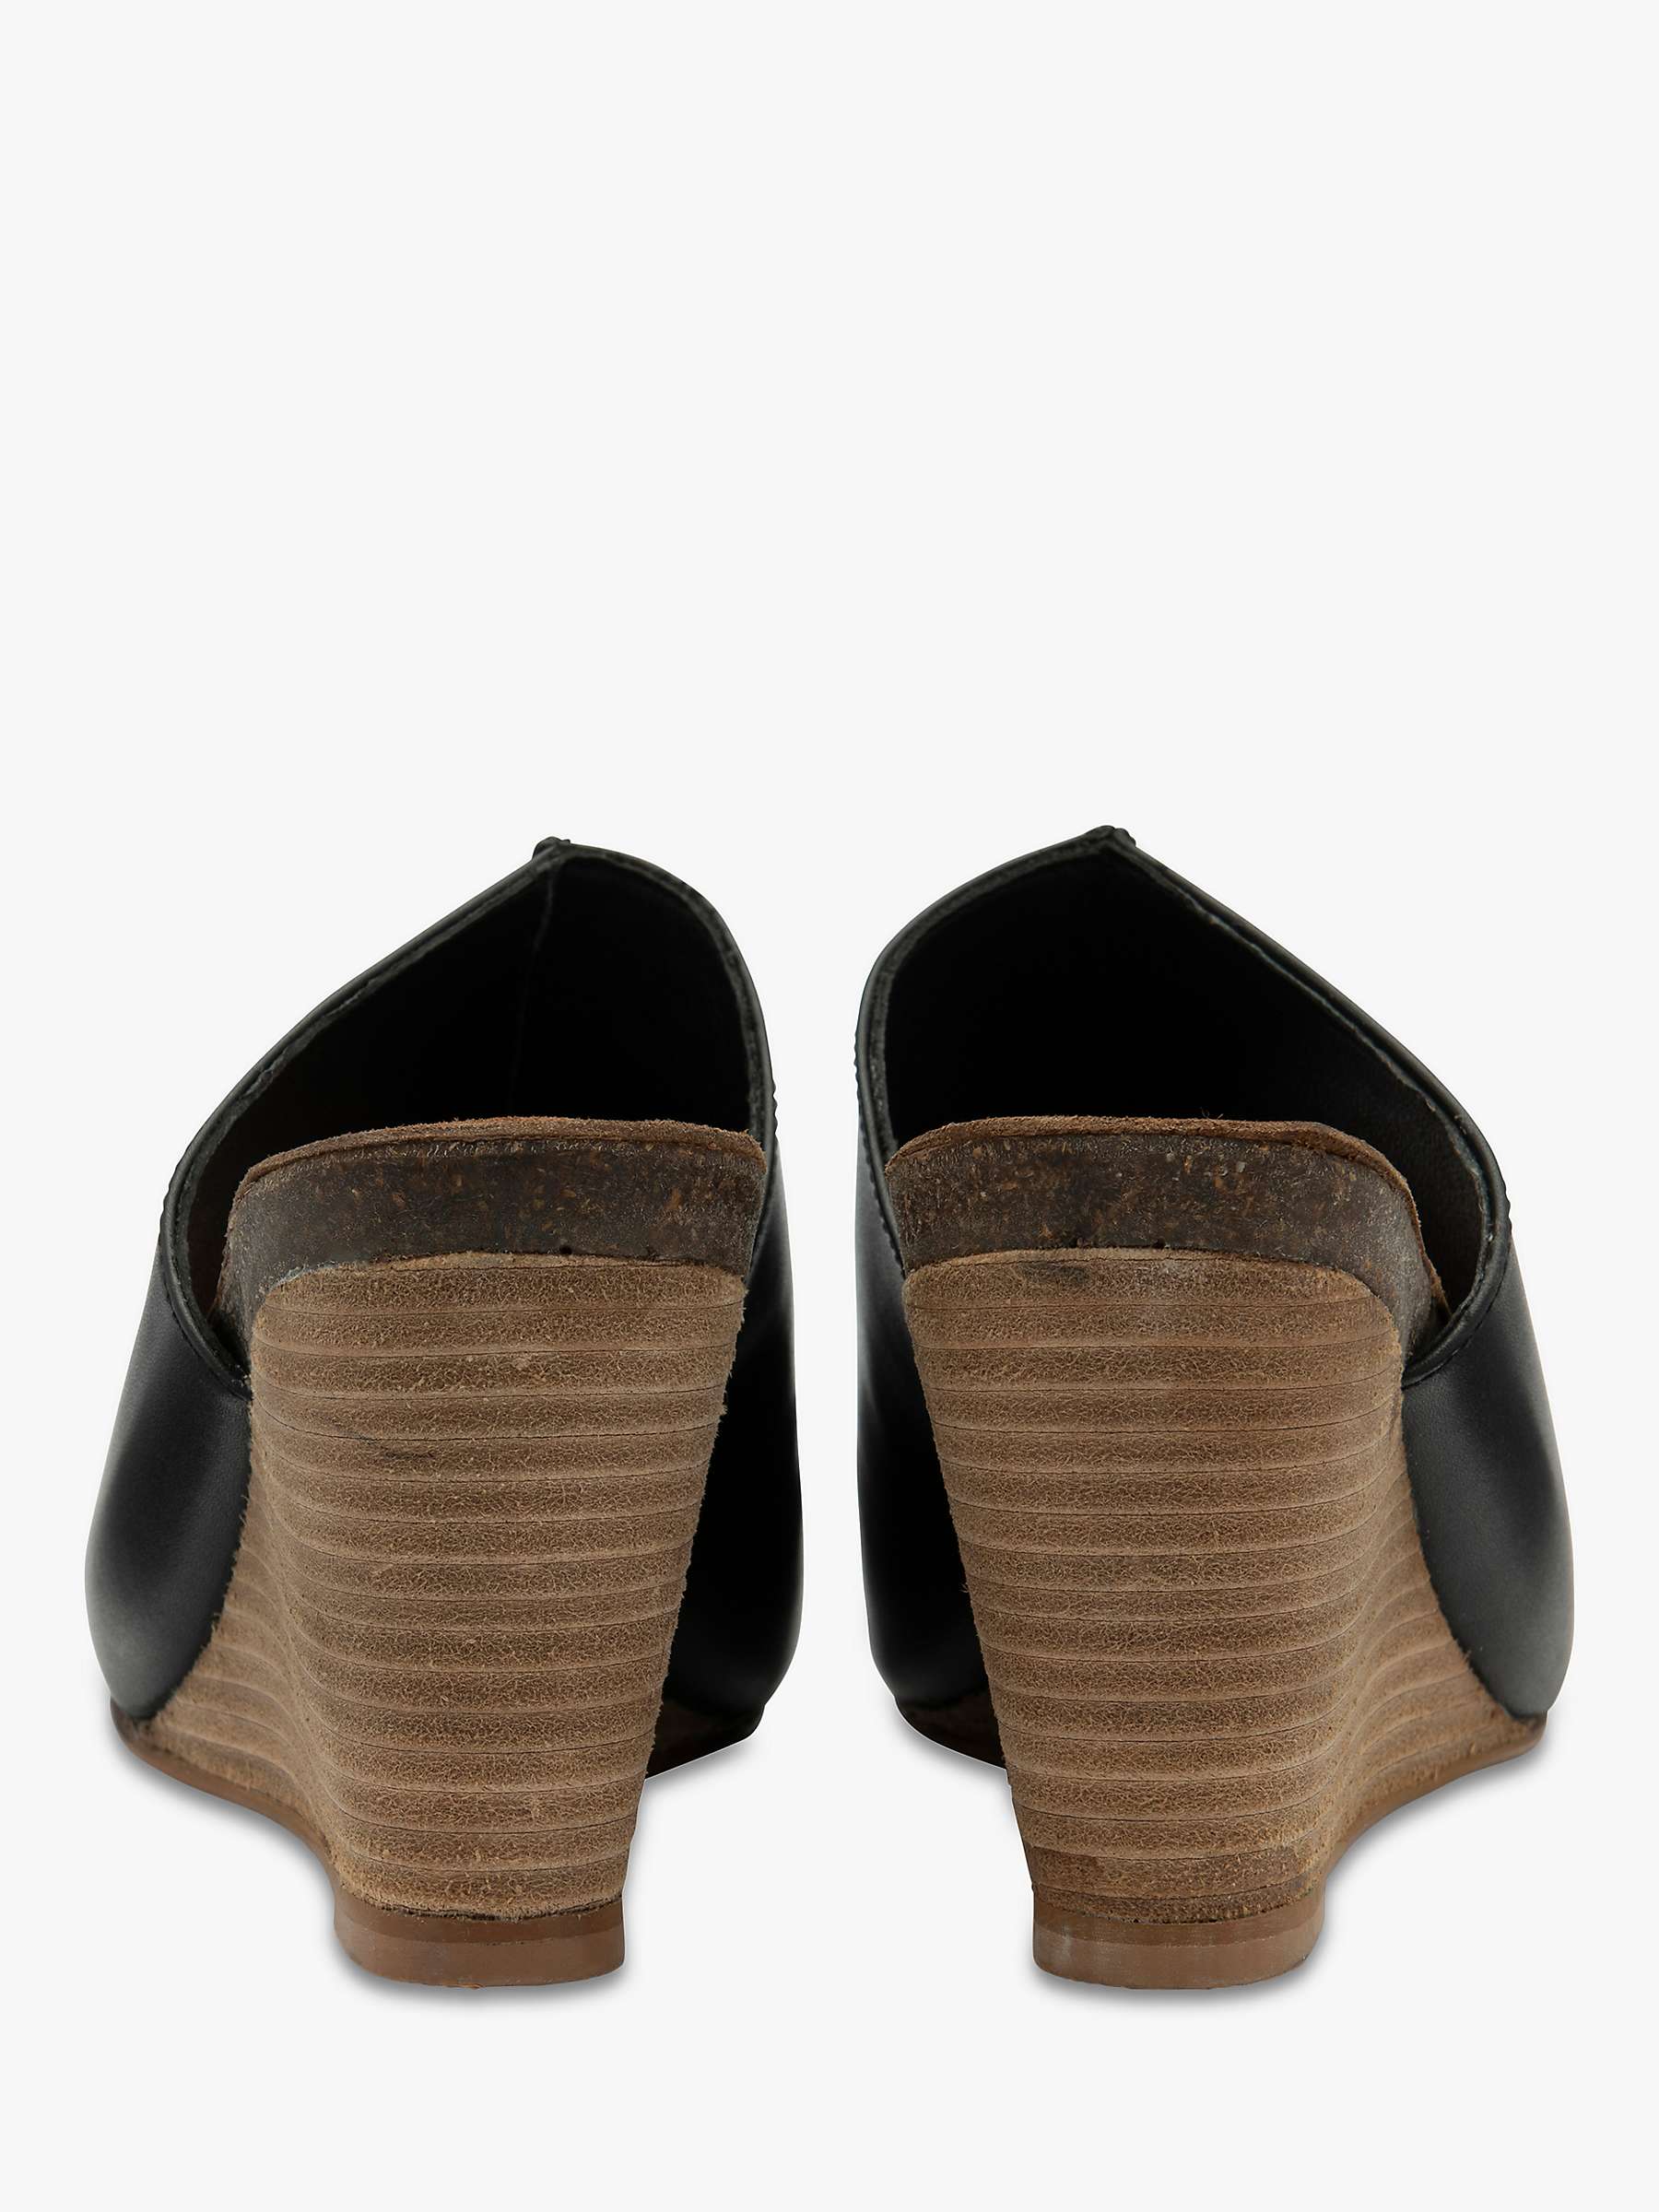 Buy Ravel Corby Leather Wedge Sandals Online at johnlewis.com